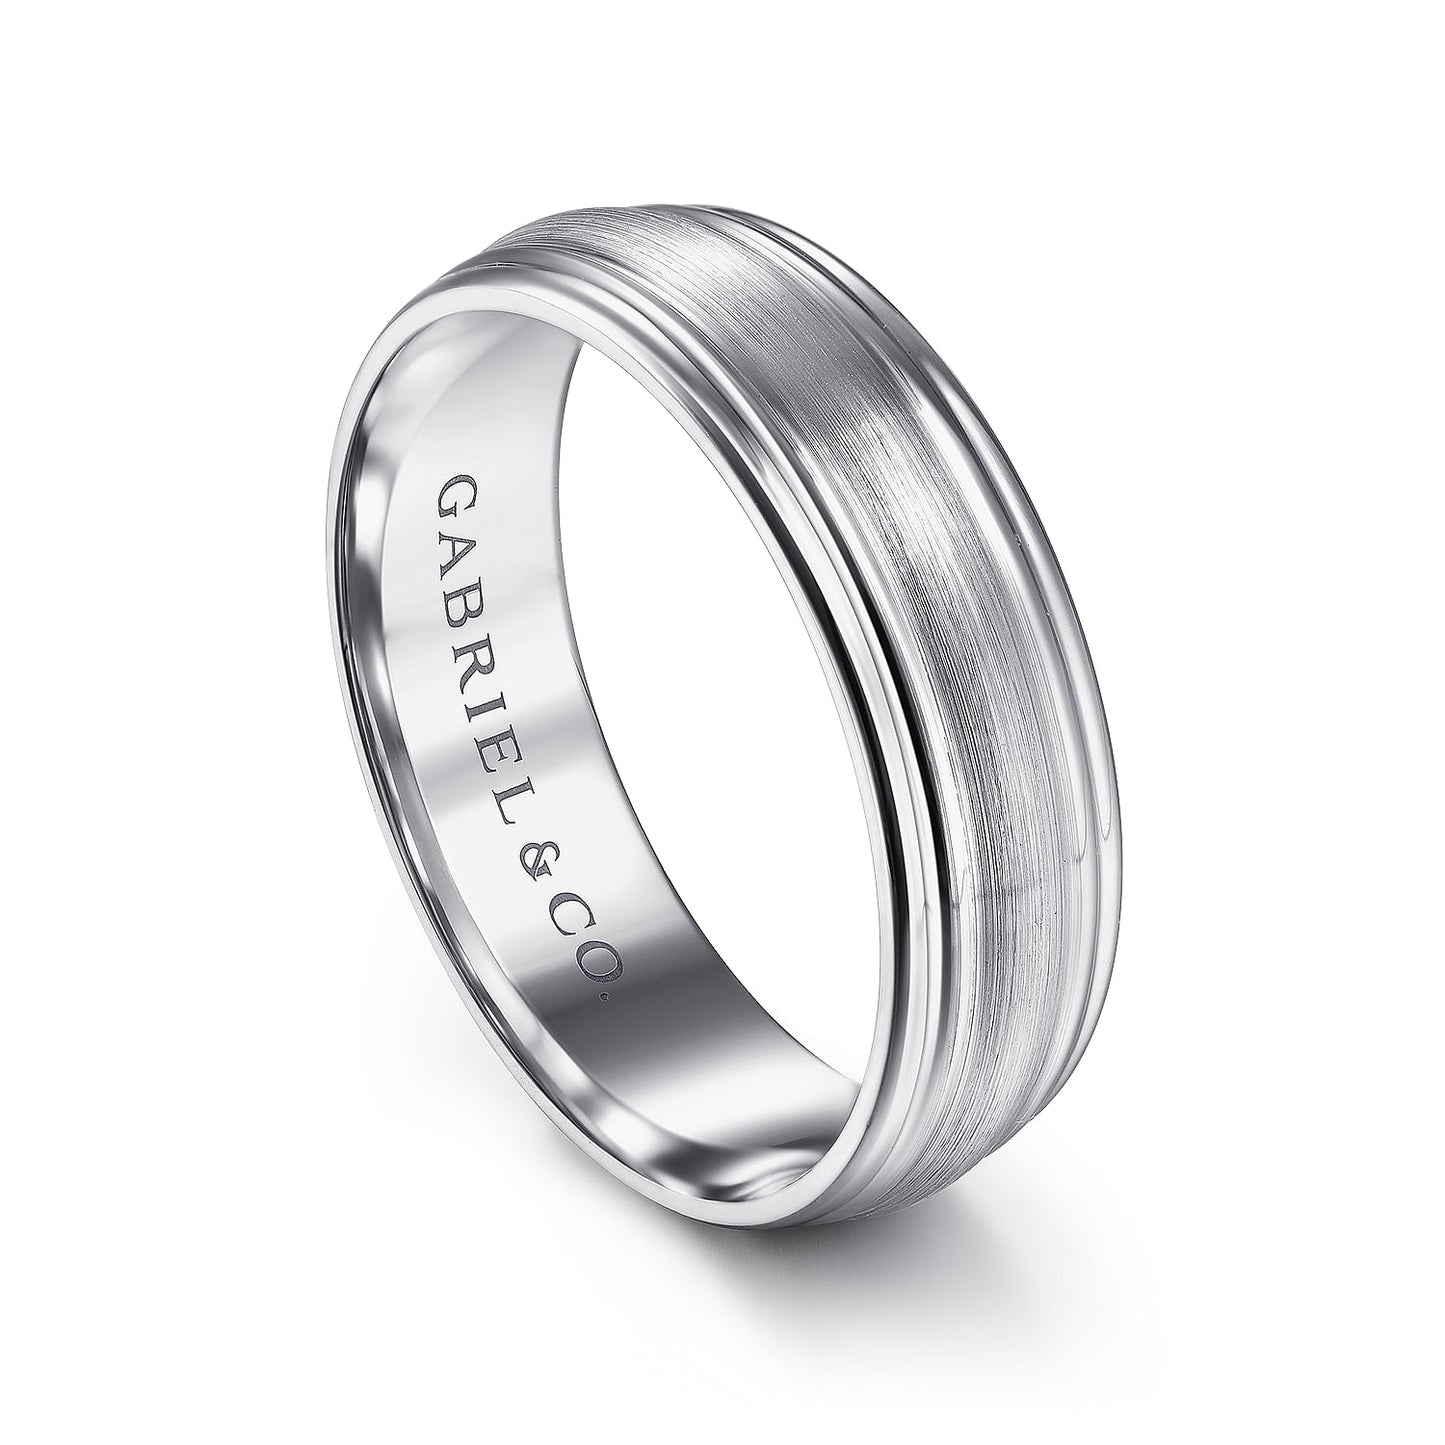 Gabriel & Co White Gold Wedding Band With A Raised Center And Polished Edges - Gold Wedding Bands - Men's